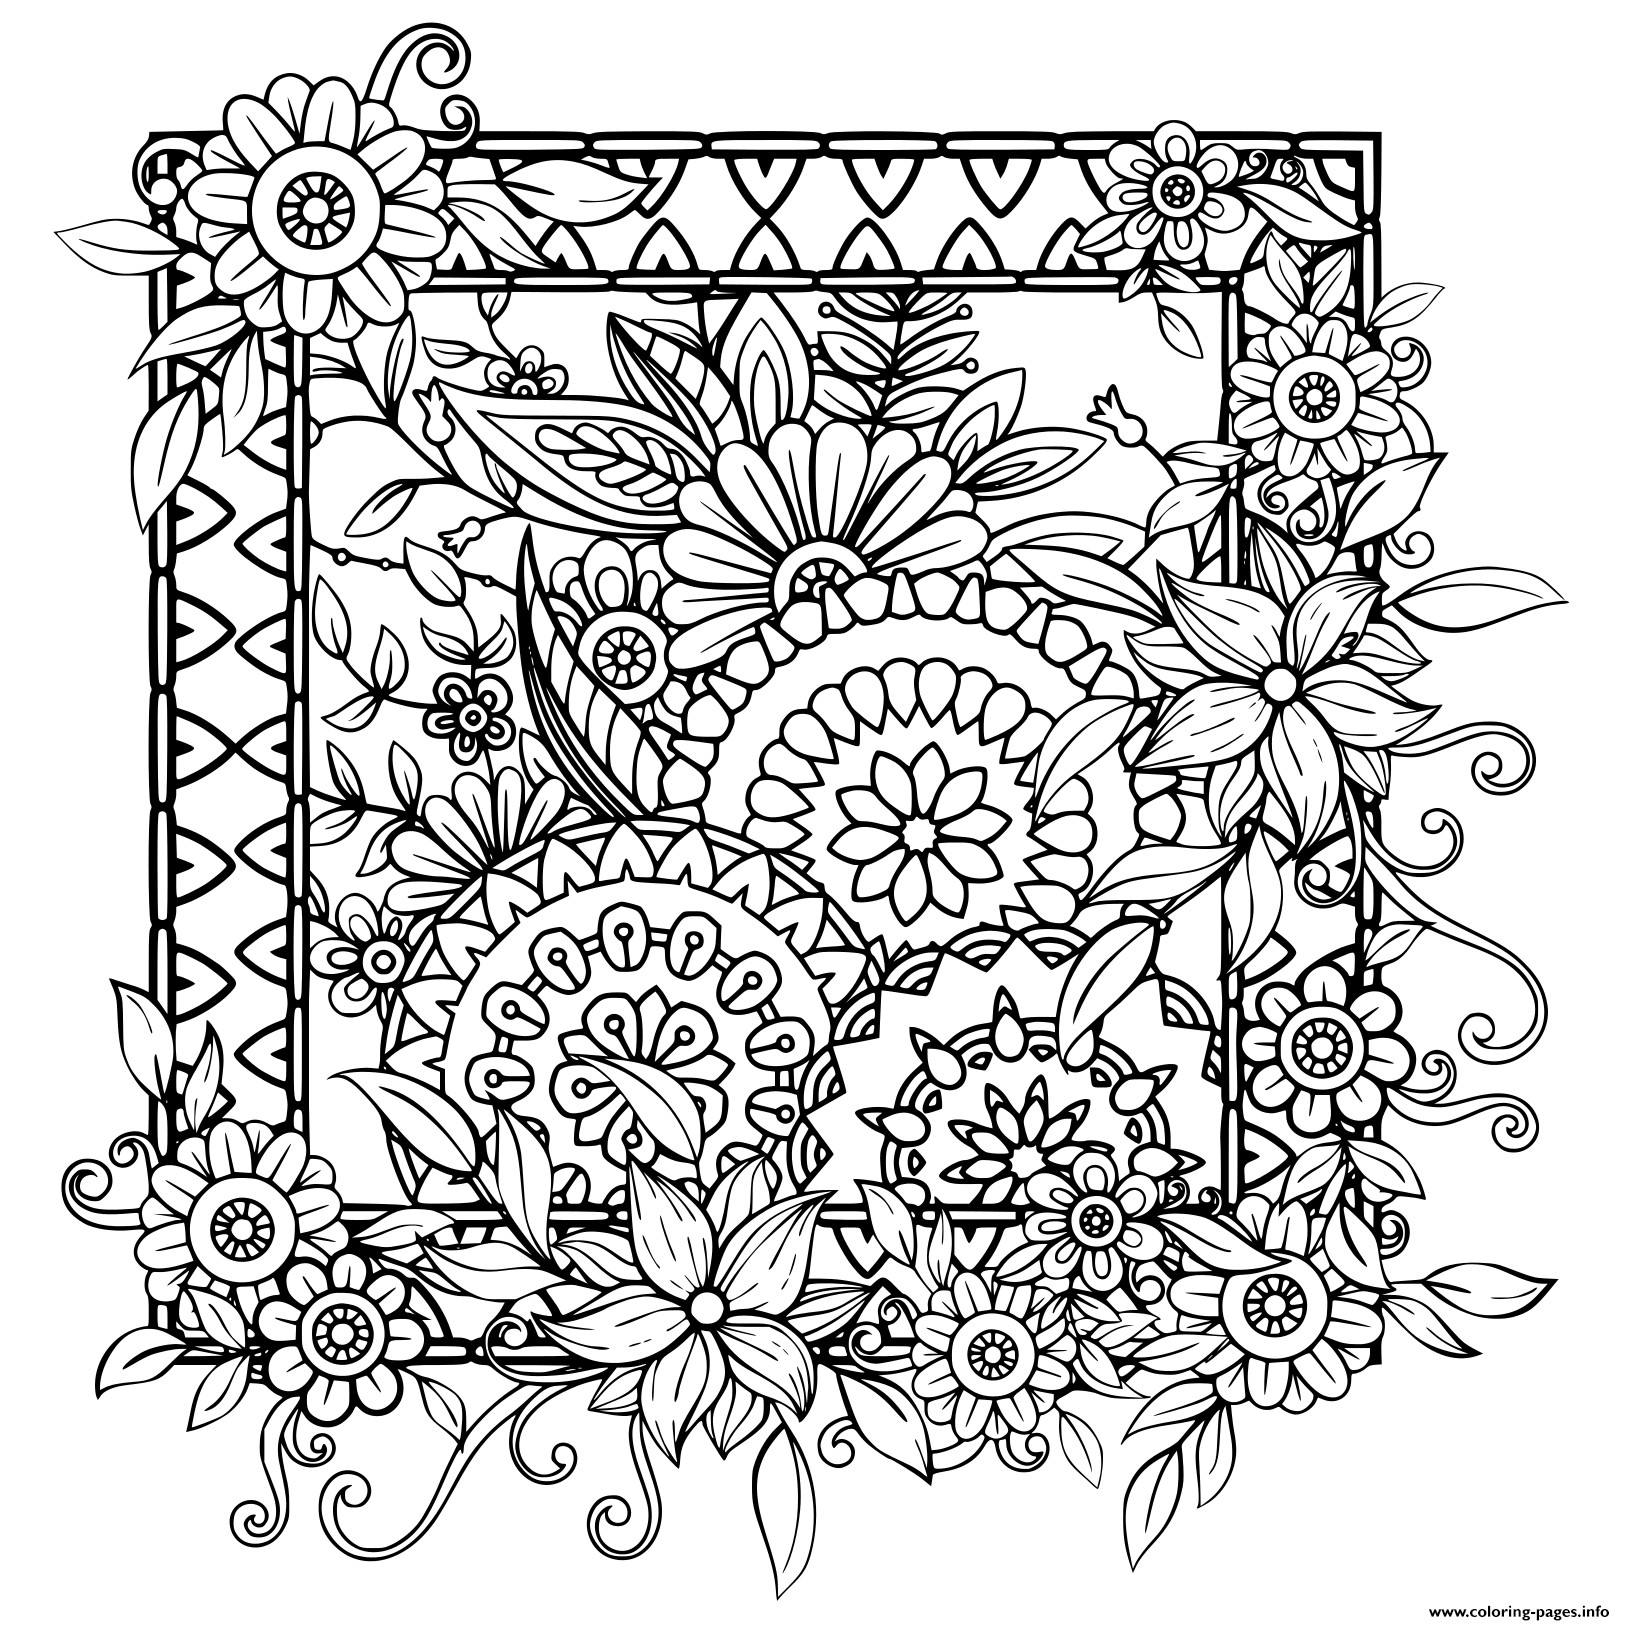 Adult Coloring Pages Patterns Flowers
 Adult With Flowers Pattern Black And White Doodle Wreath